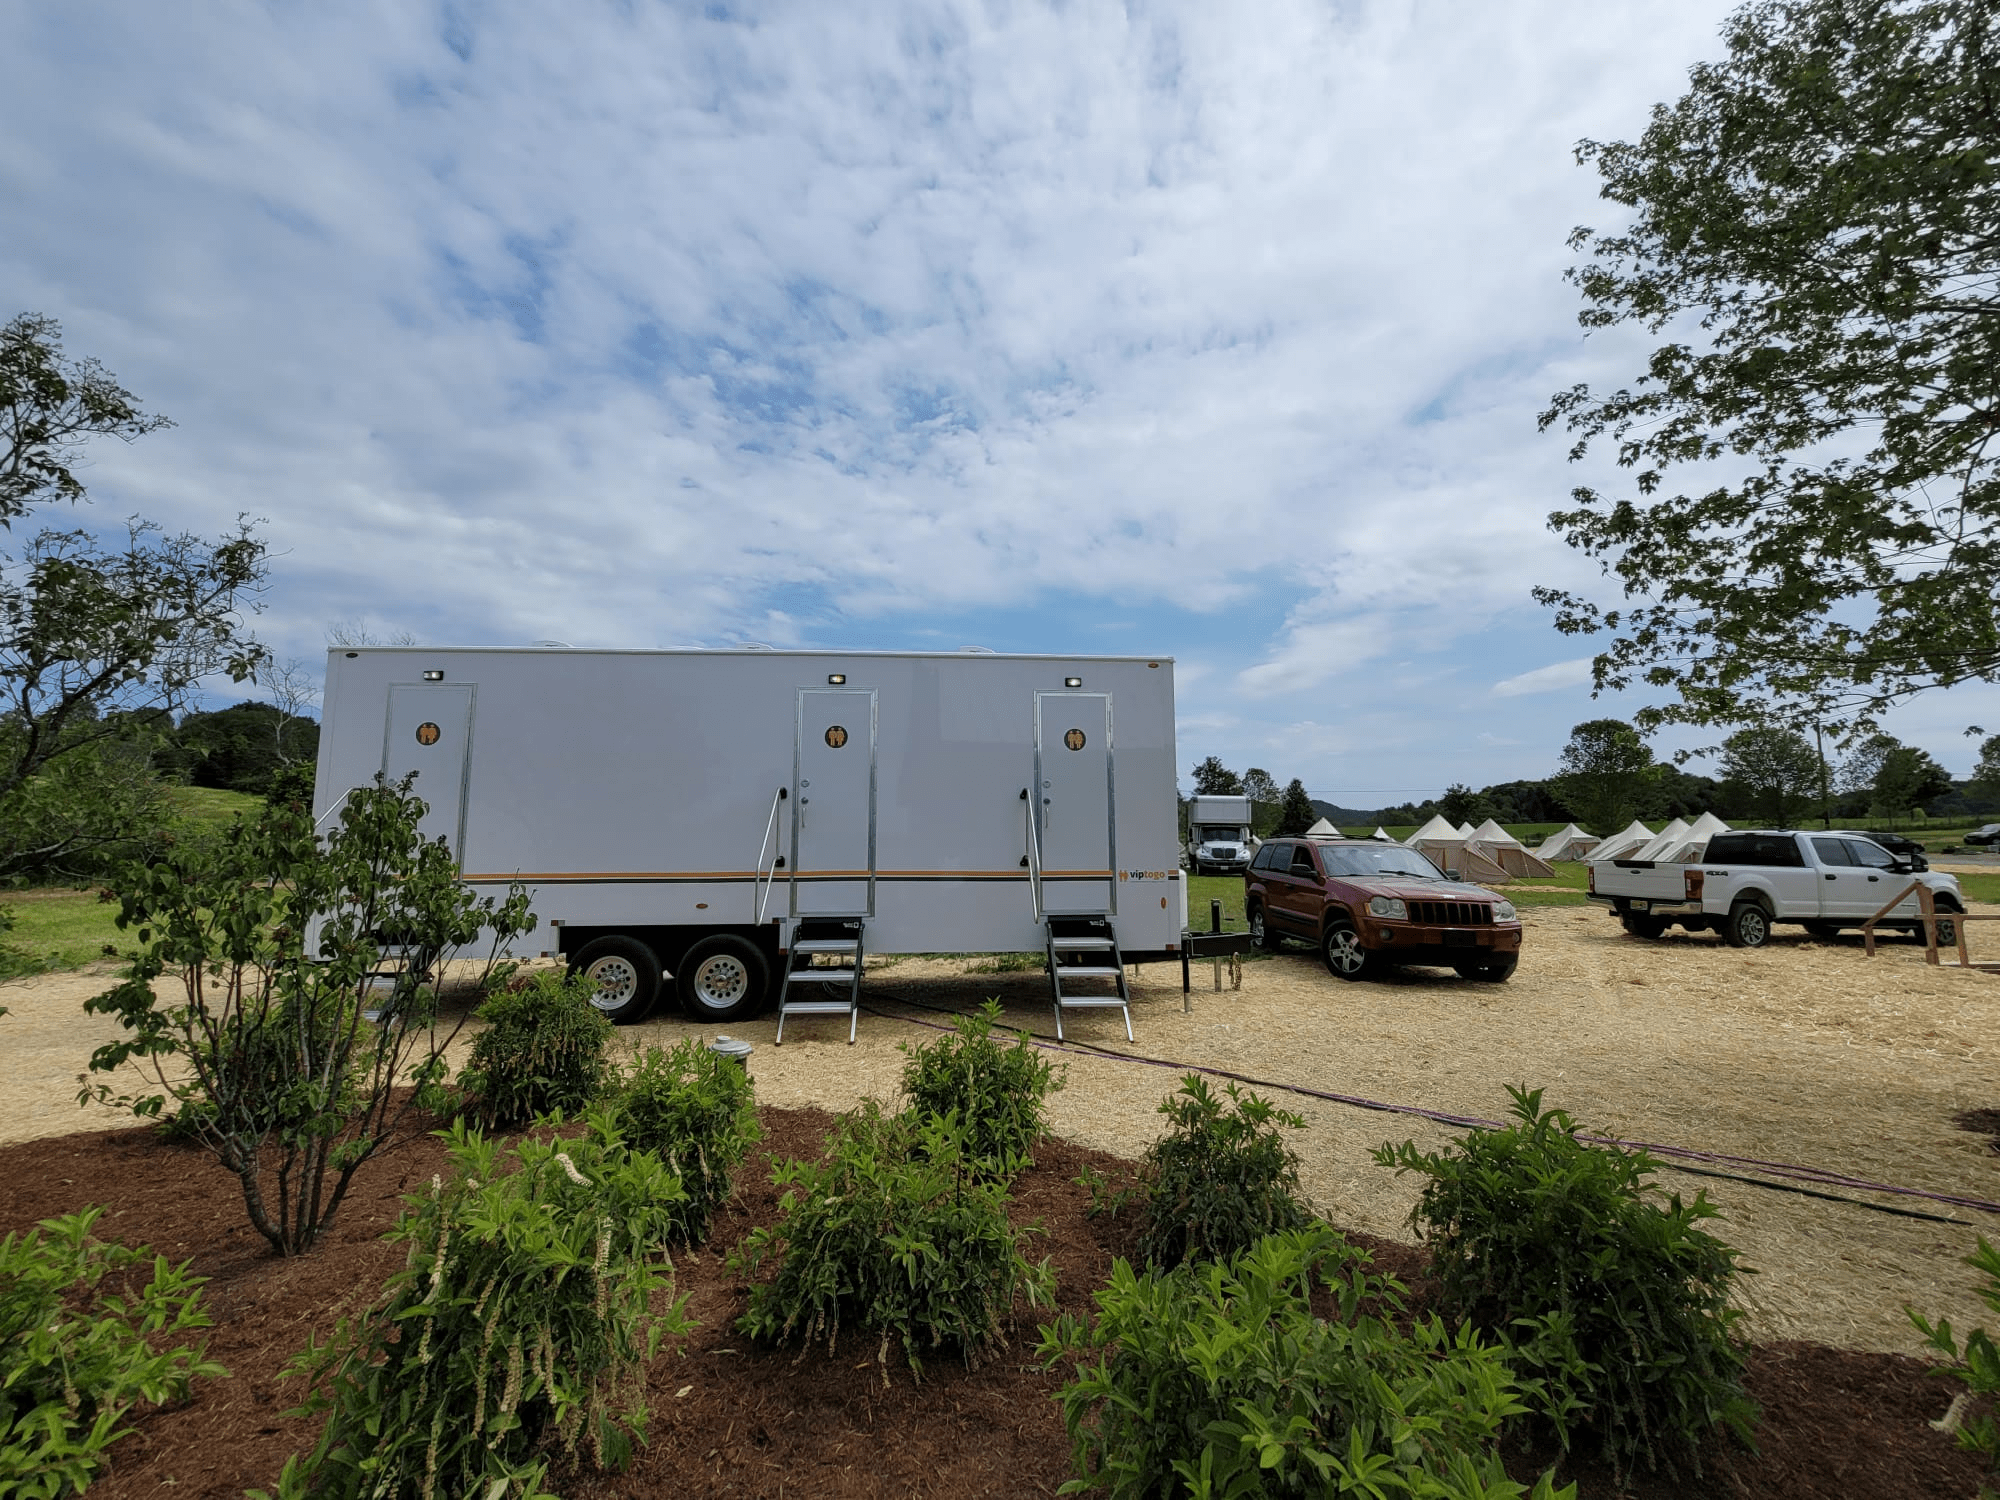 farm portable restrooms in agricultural setting